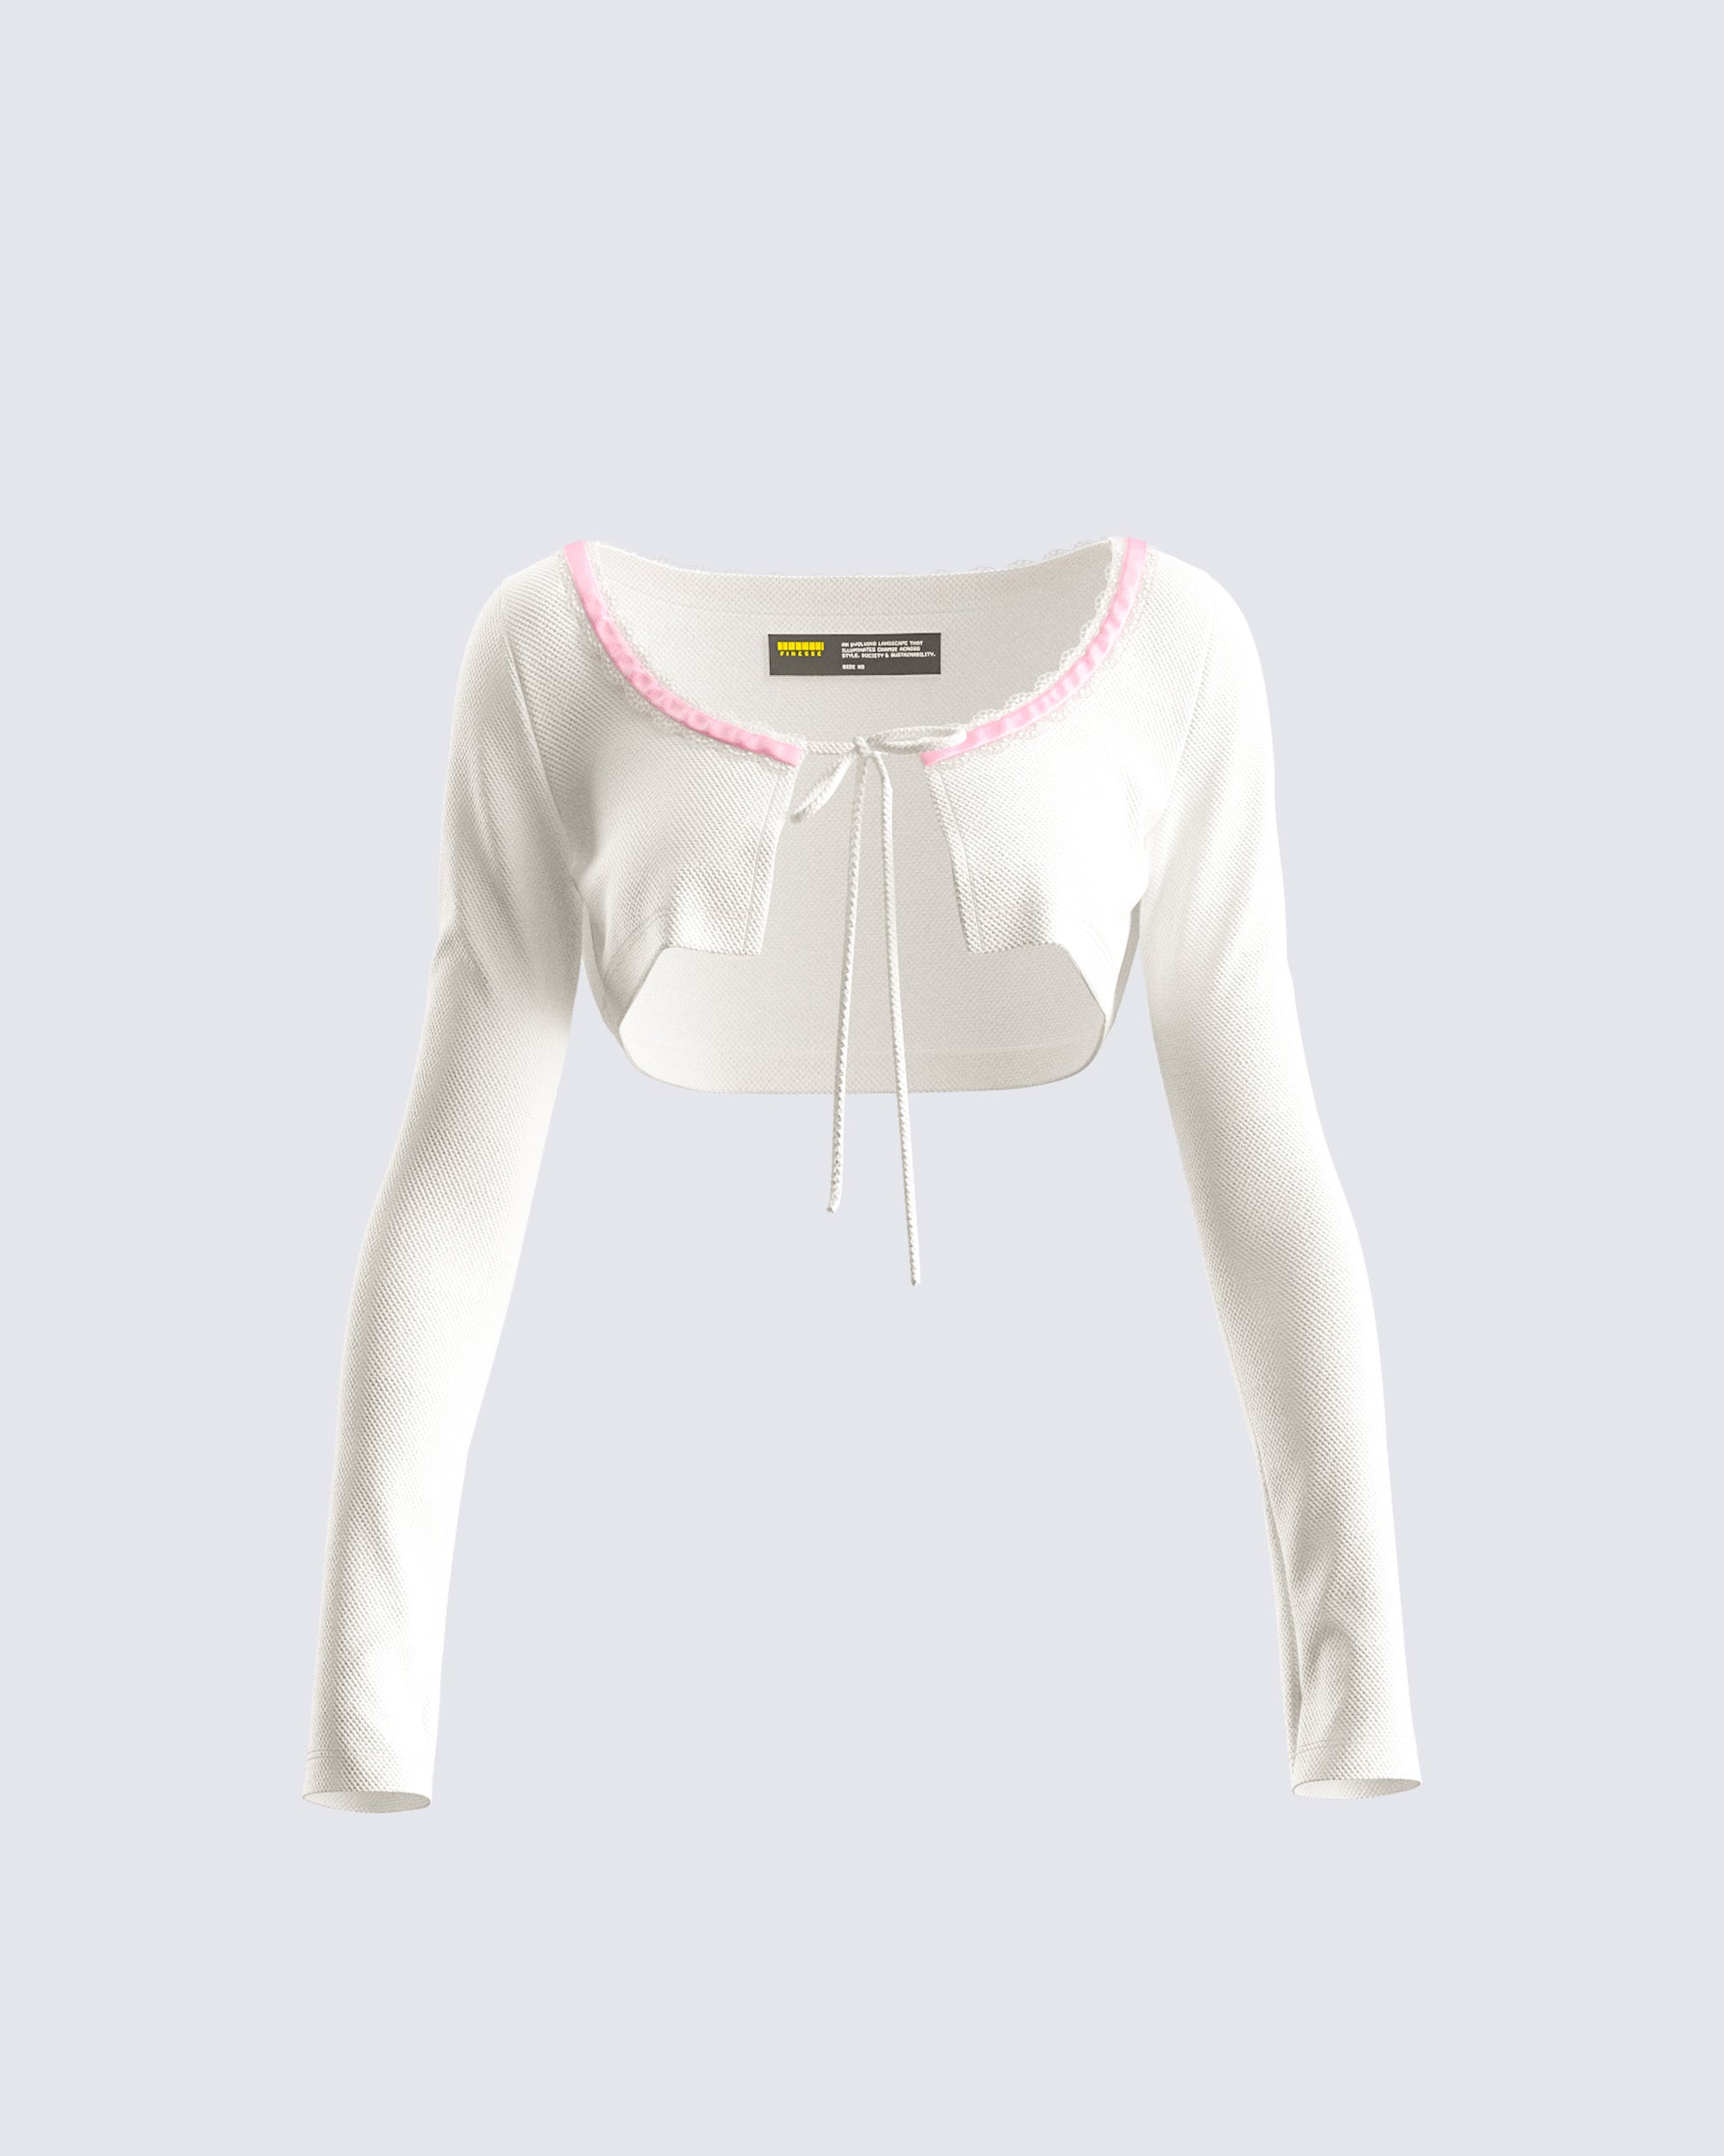 Finesse top in white